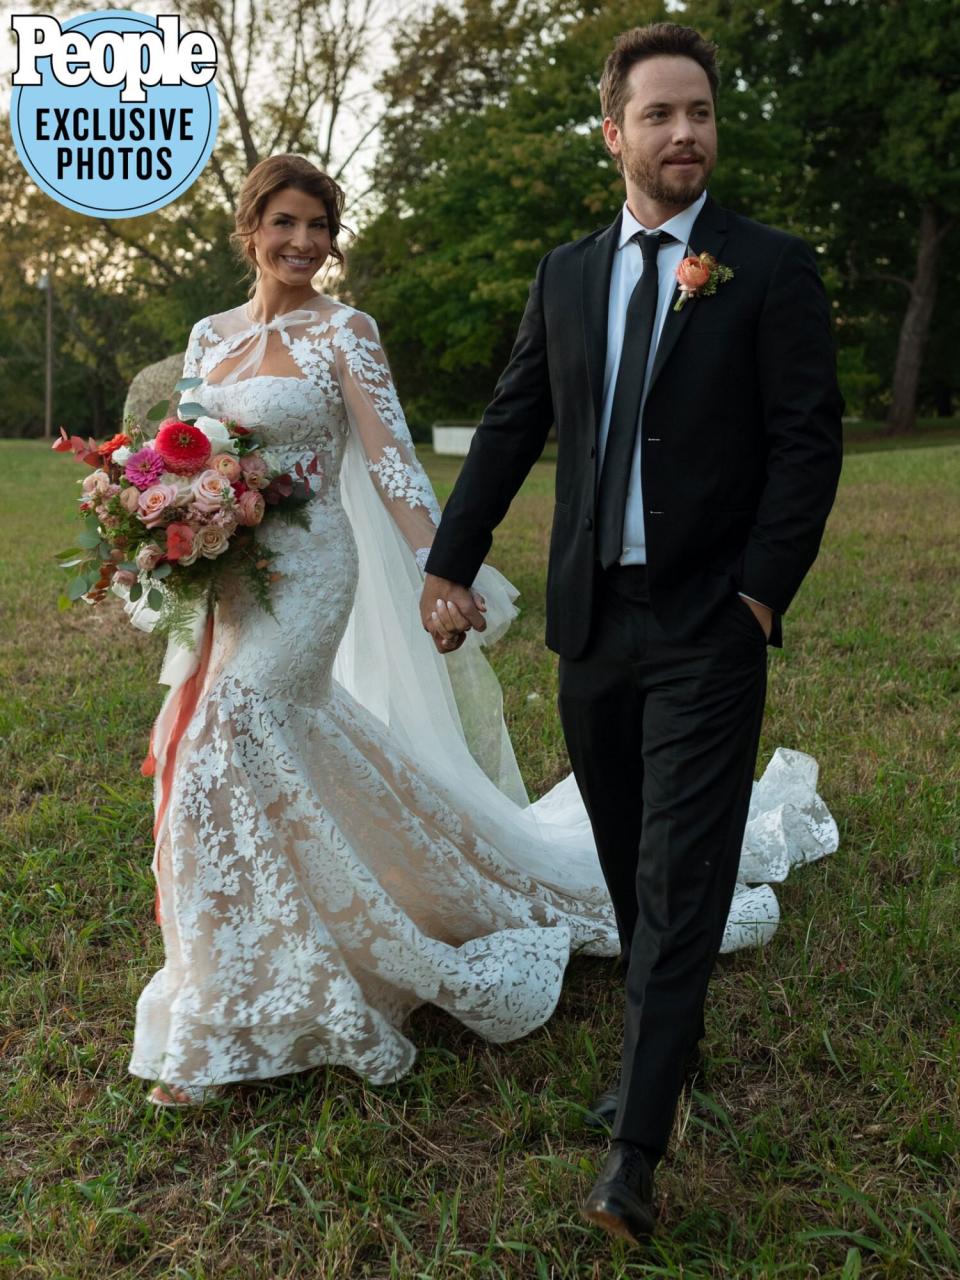 Peter Pan Actor Jeremy Sumpter Marries Elizabeth Treadway in Tennessee — See the Dreamy Photos. Amanda Trout Owner of Blacc Velvett Media + White Velvett Photography